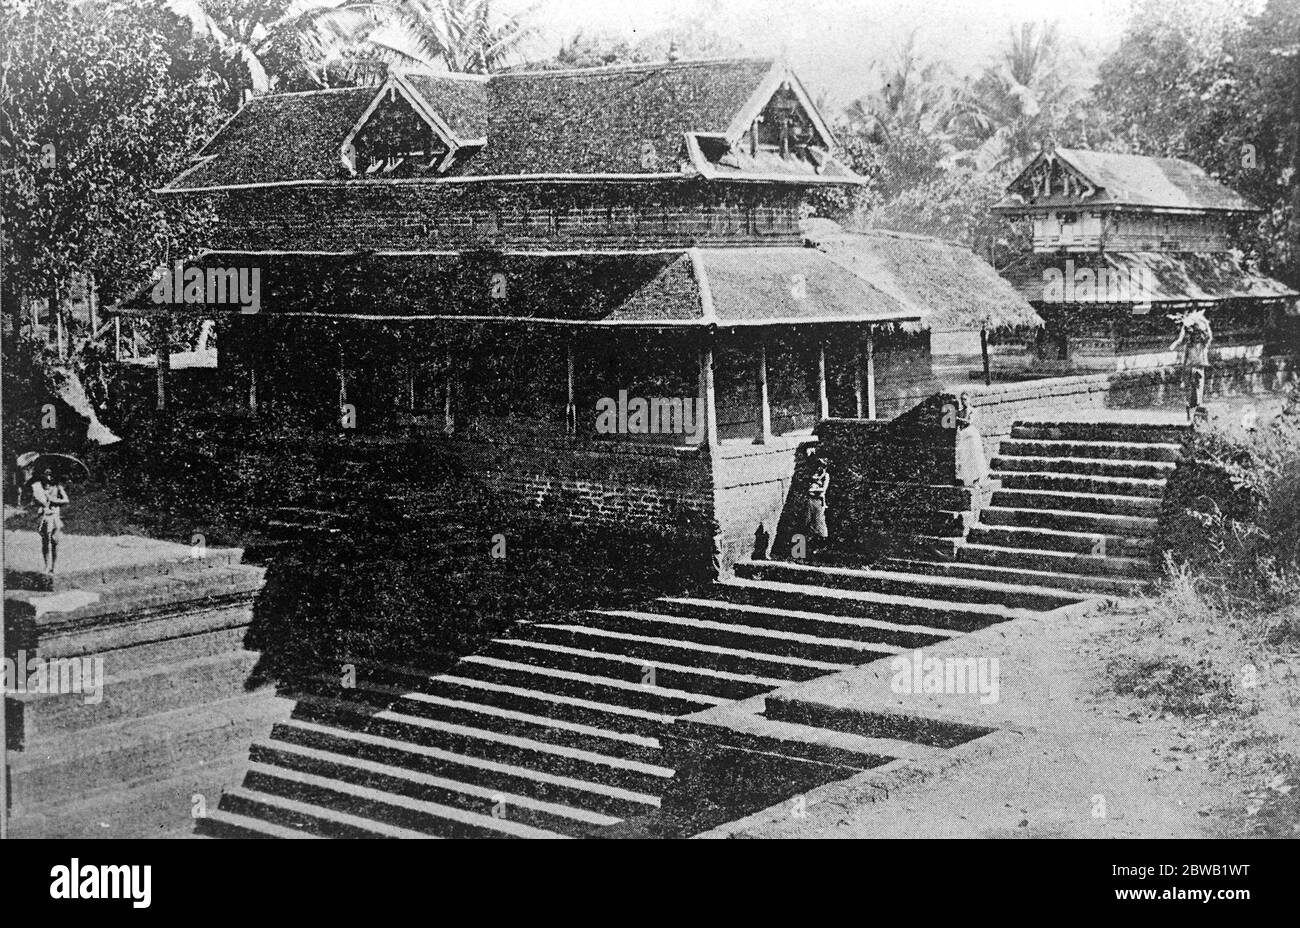 The Moplah Rising in India Grave anxiety has been caused by the development of the revolt of the fanatical Moplahs of Malabar ( South West India ) Here can be seen European planters at Ootacamund Moplah Mosque 30 August 1921 Stock Photo